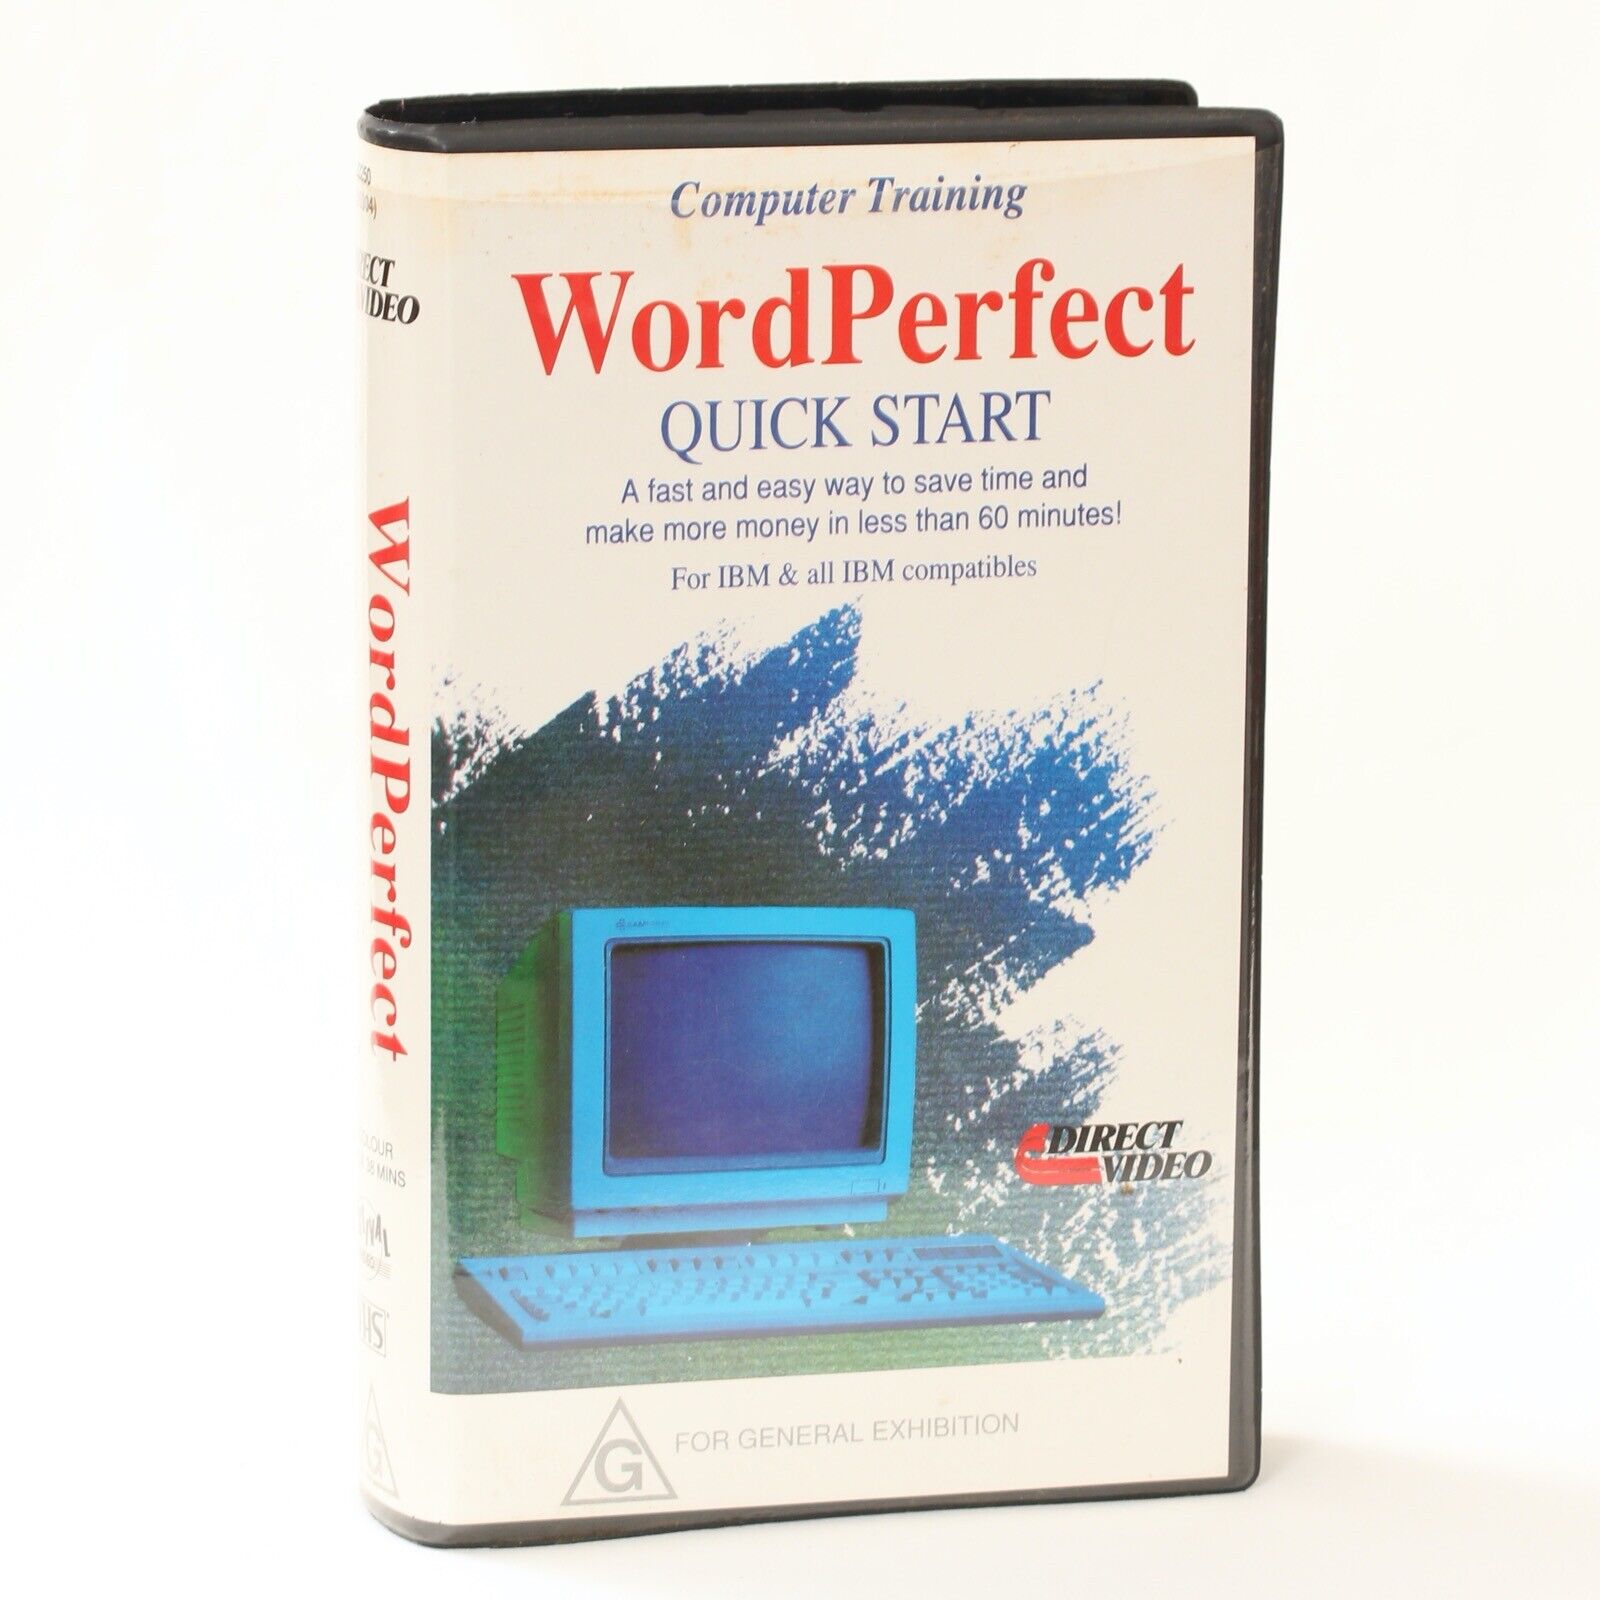 Vintage Computer Training Word Perfect Quick Start for IBM VHS Tape from 1989